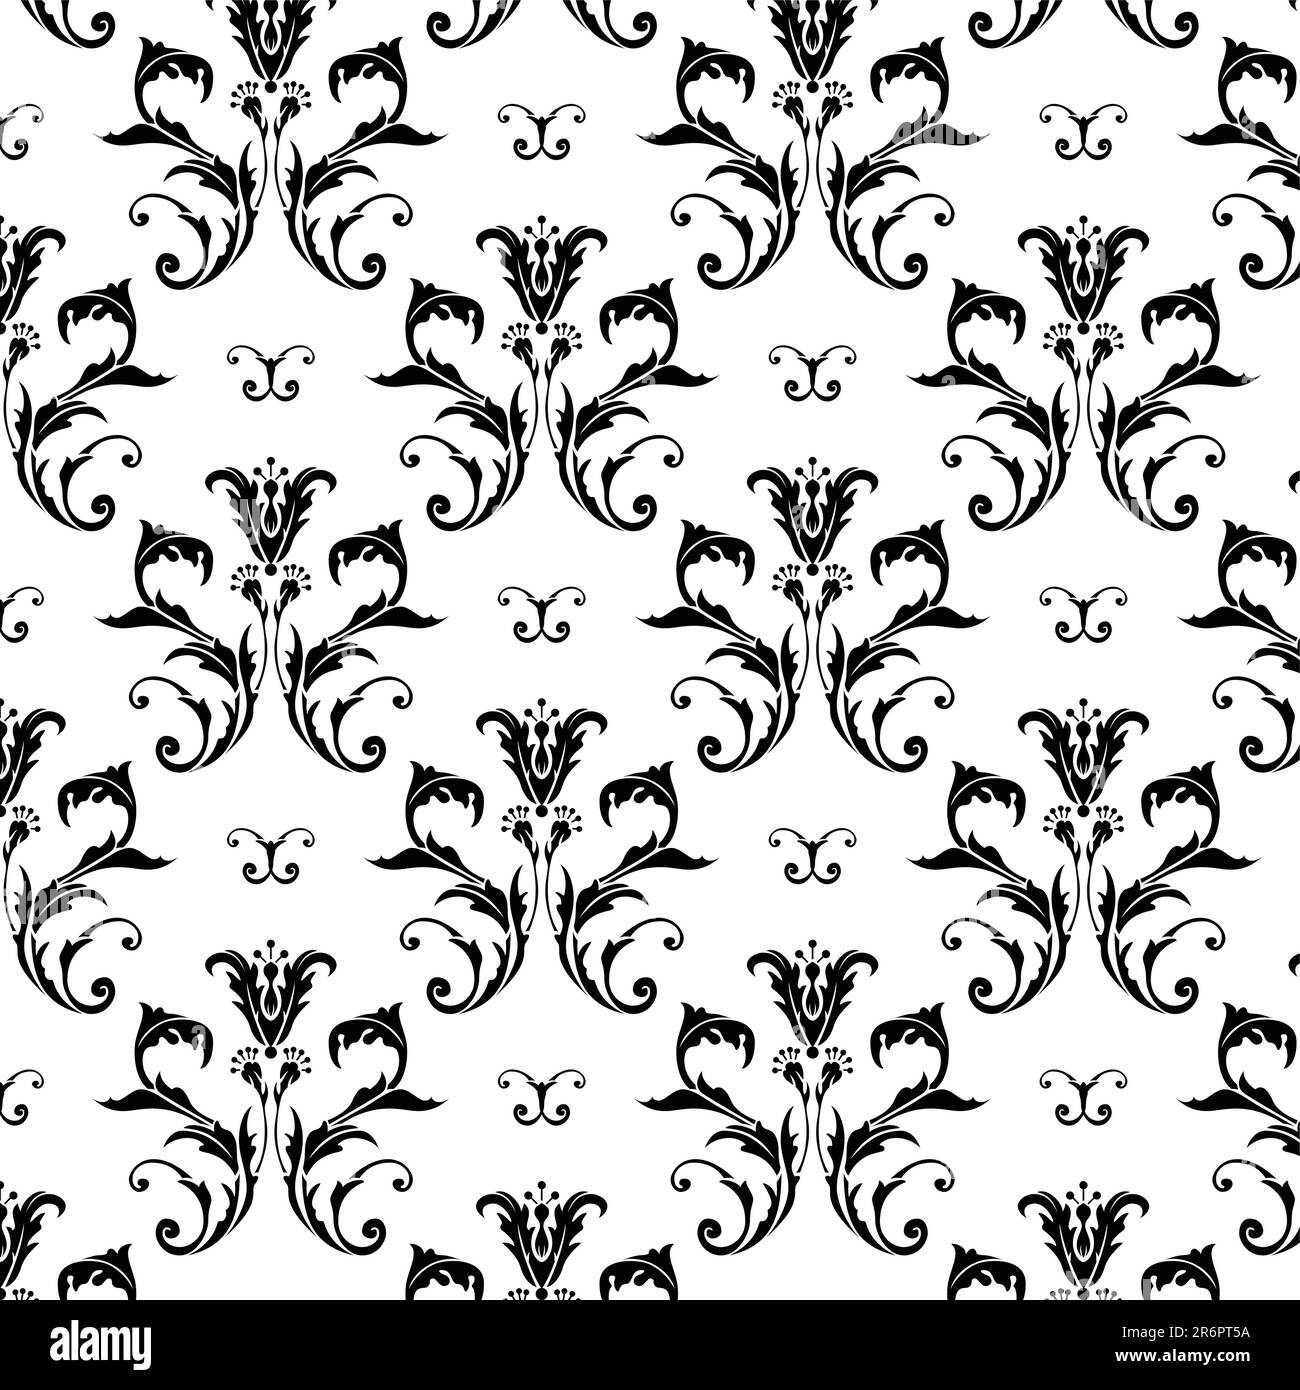 Illustration of a black and with vintage floral pattern Stock Vector